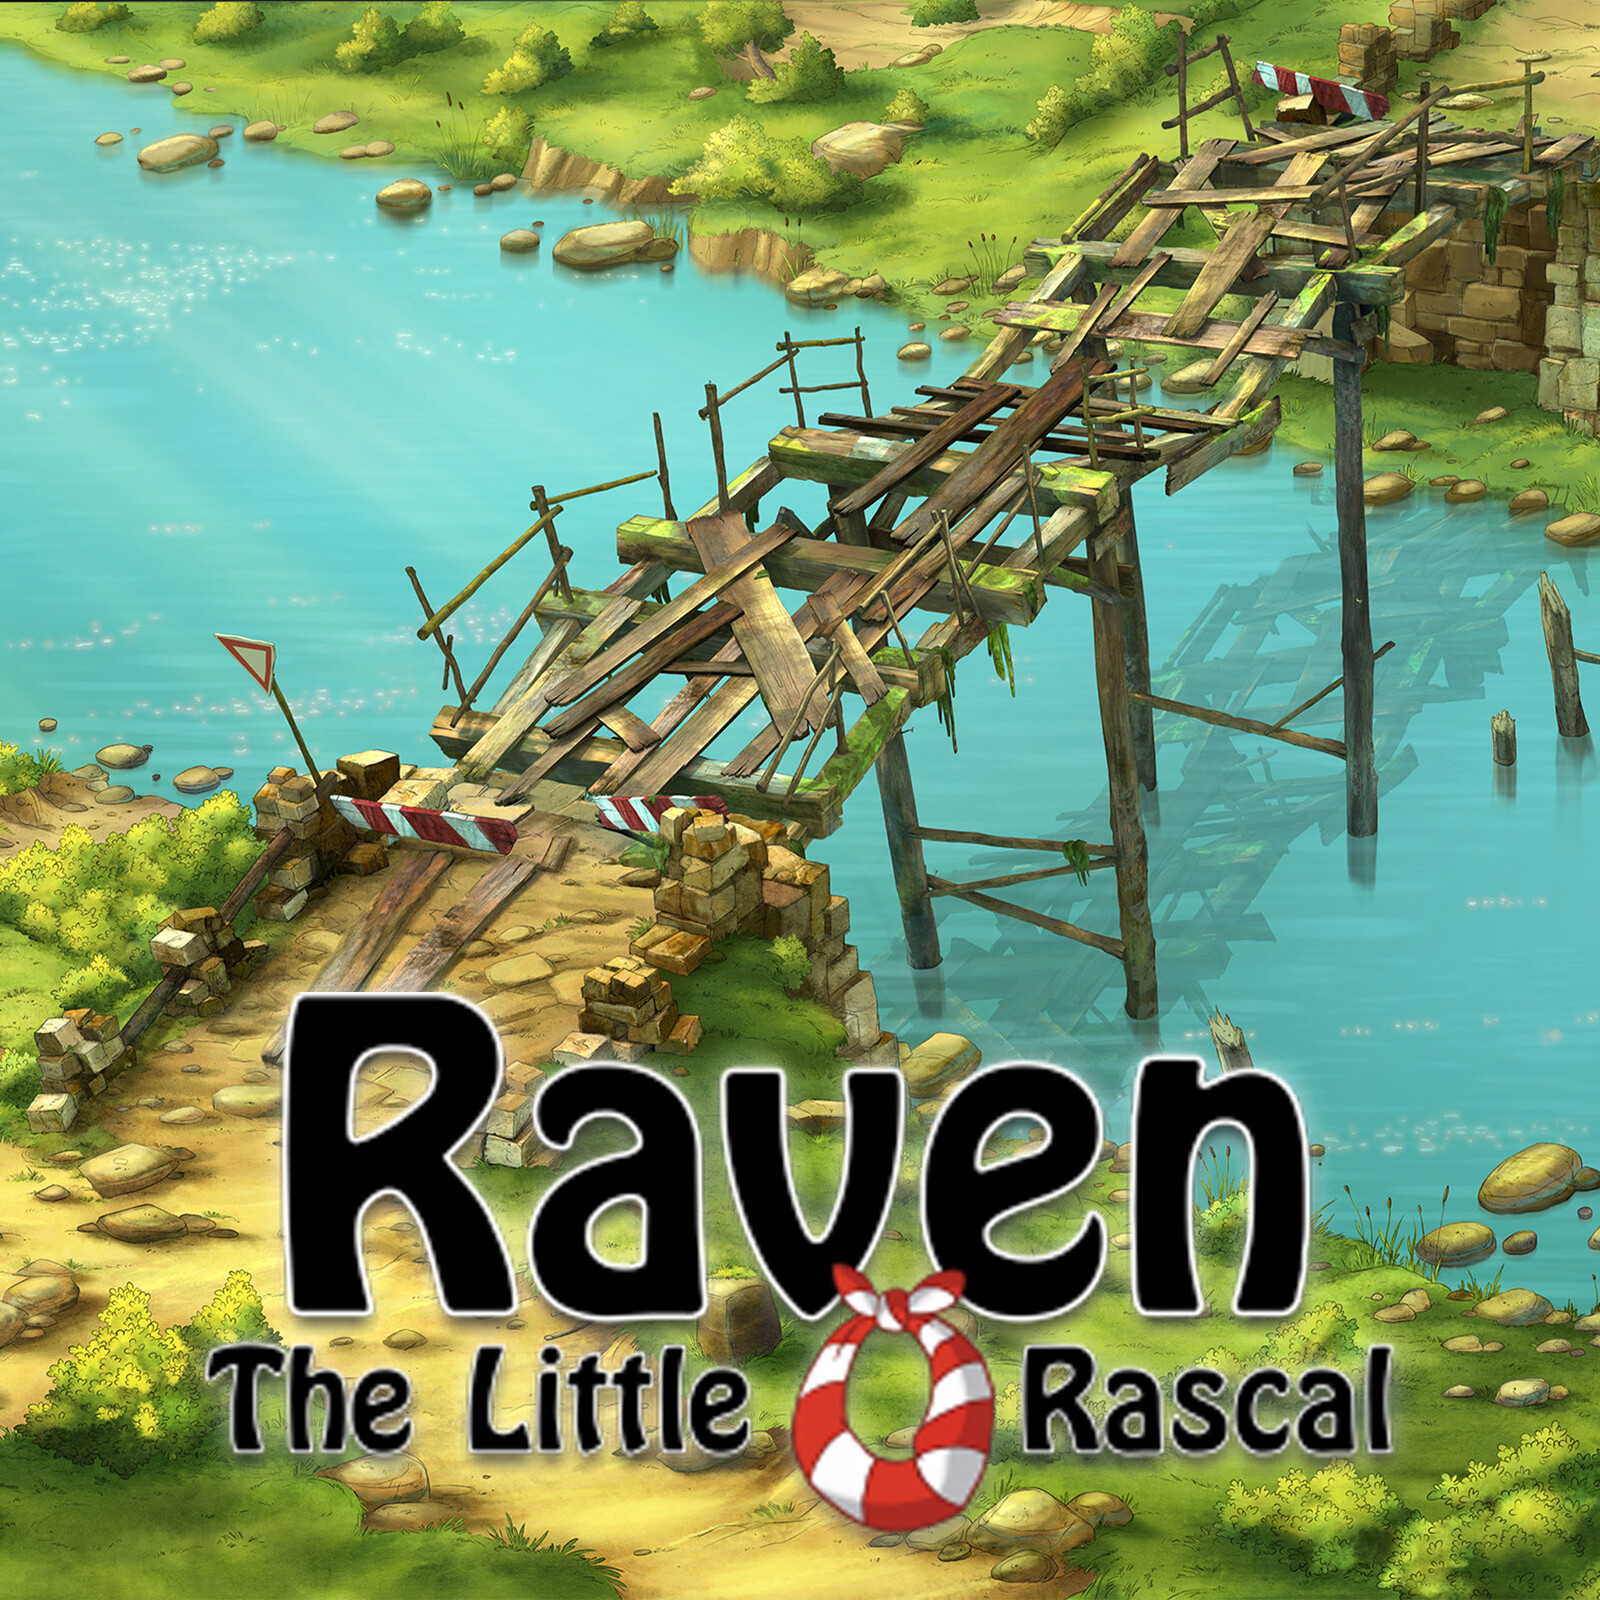 Raven The Little Rascal 3. background paintings